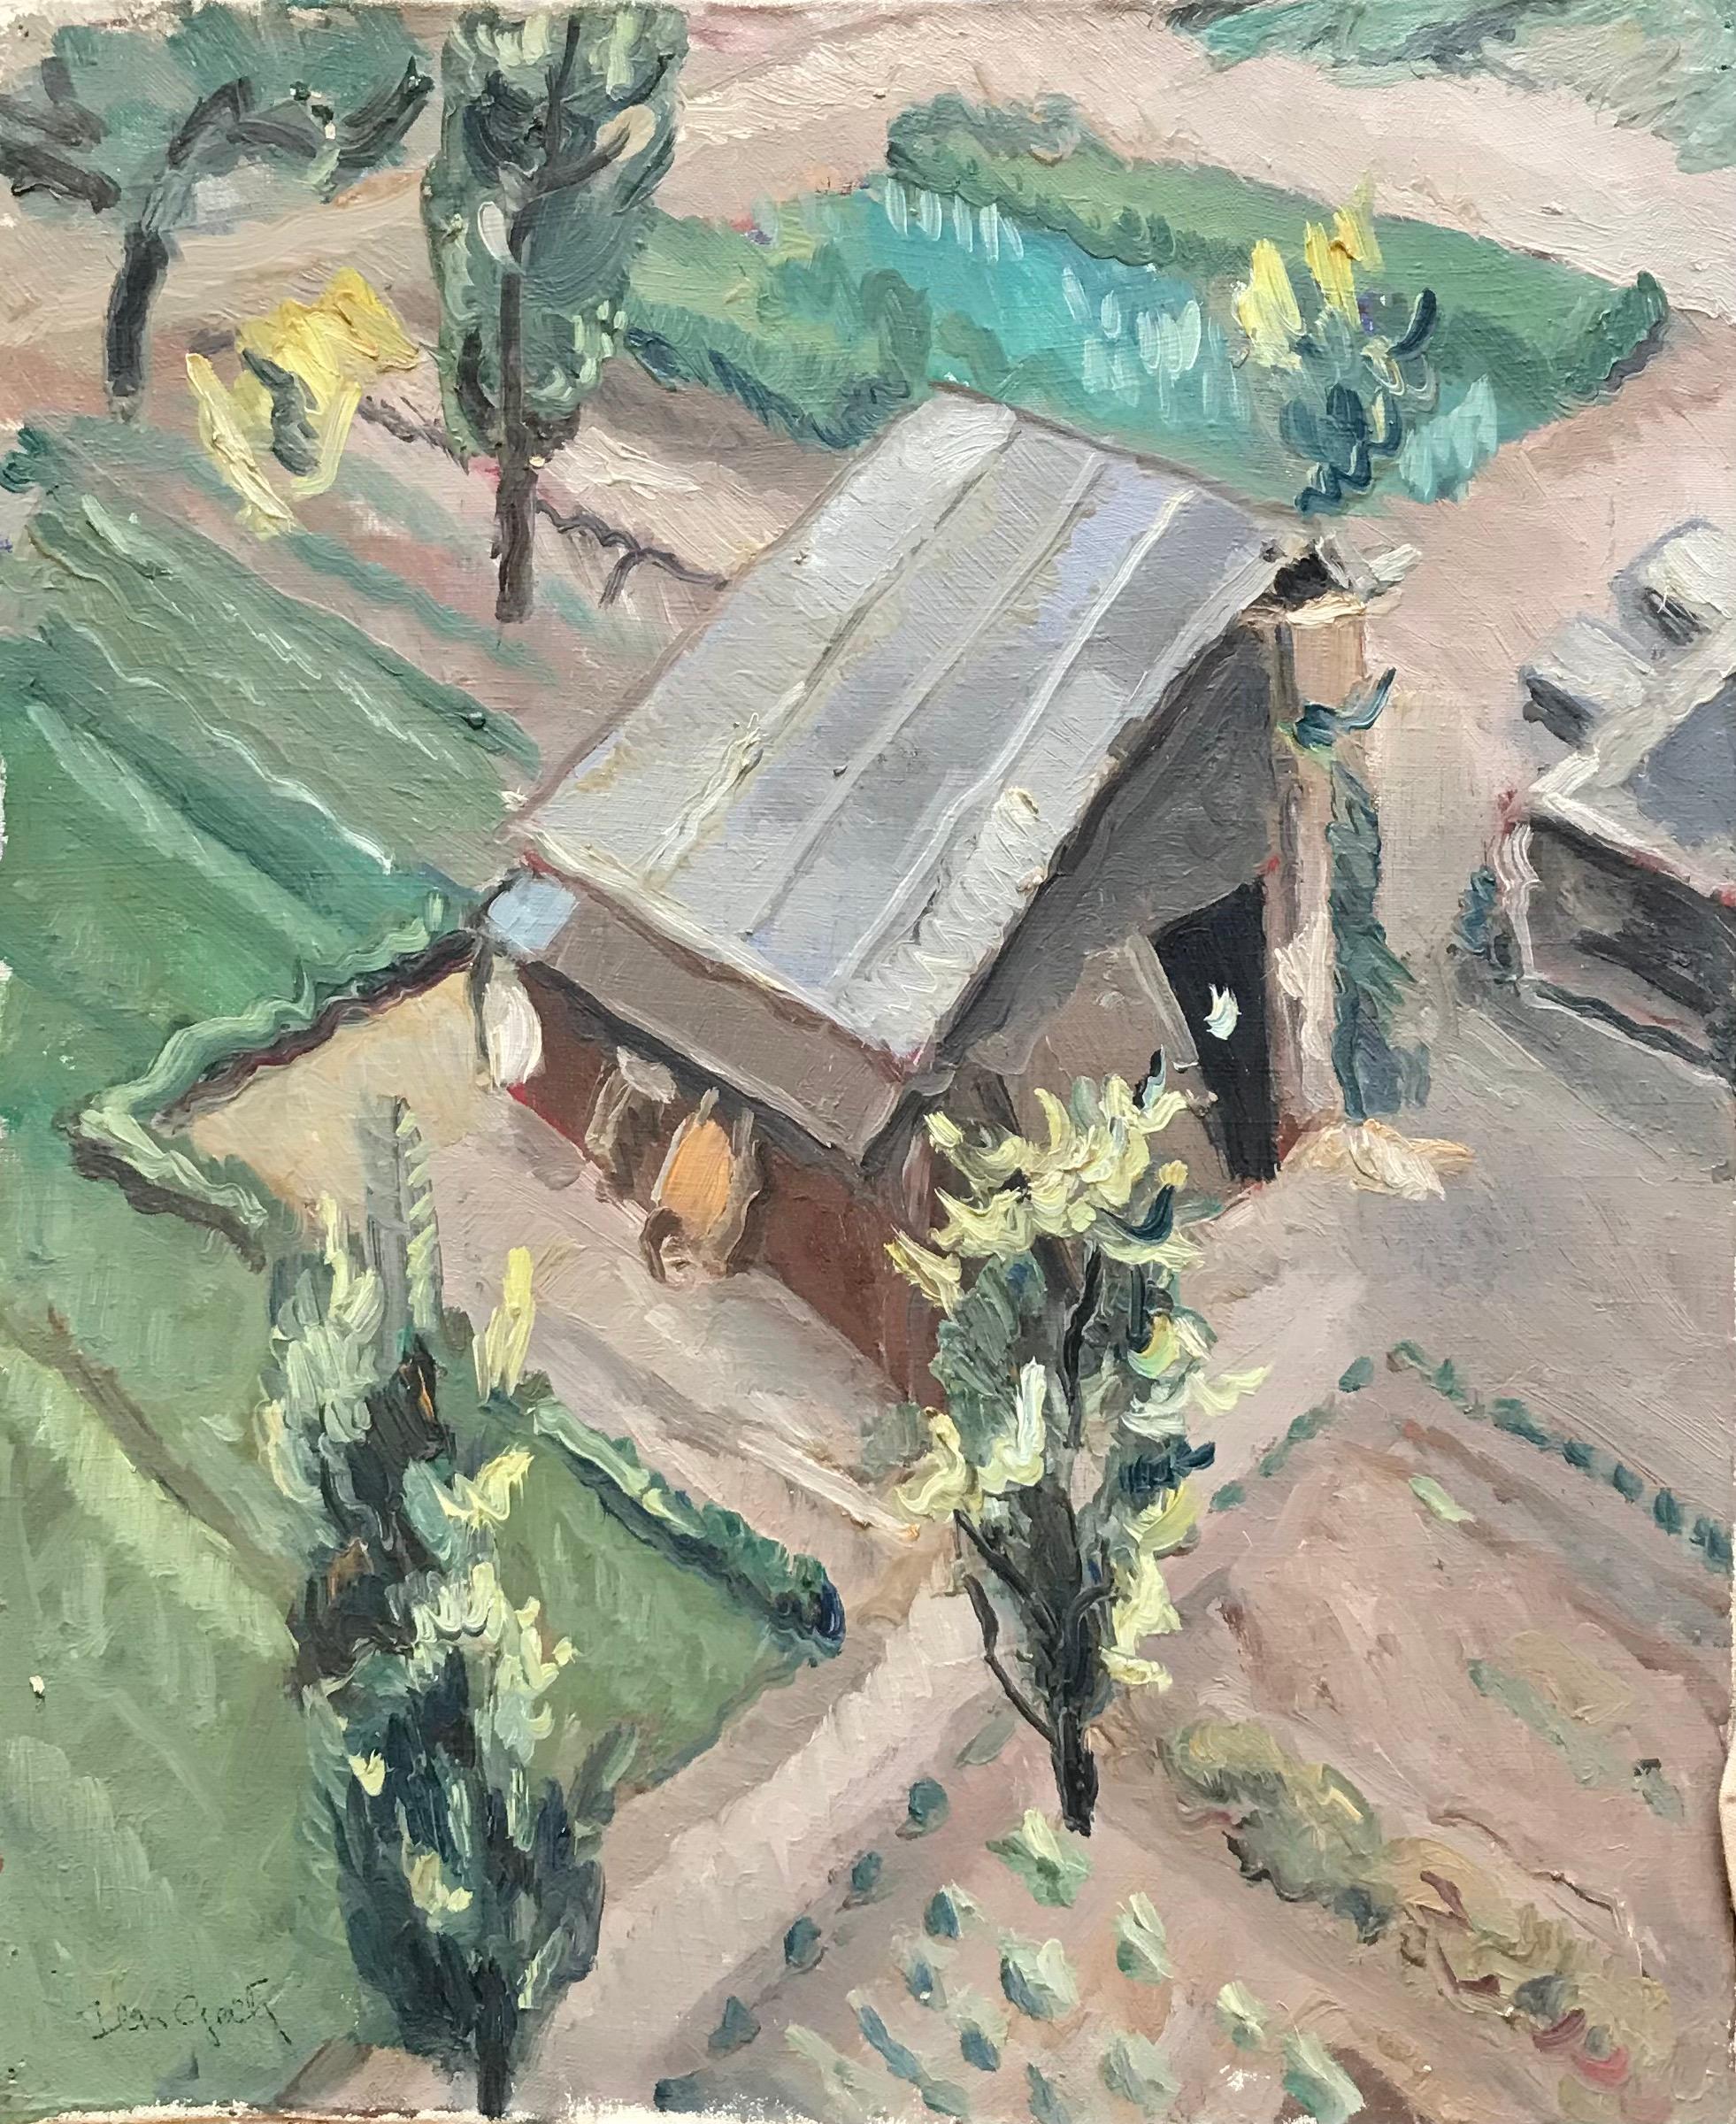 Isaac Charles Goetz Landscape Painting - Barn view from above by I. Ch. Goetz - Oil on canvas 38x46 cm